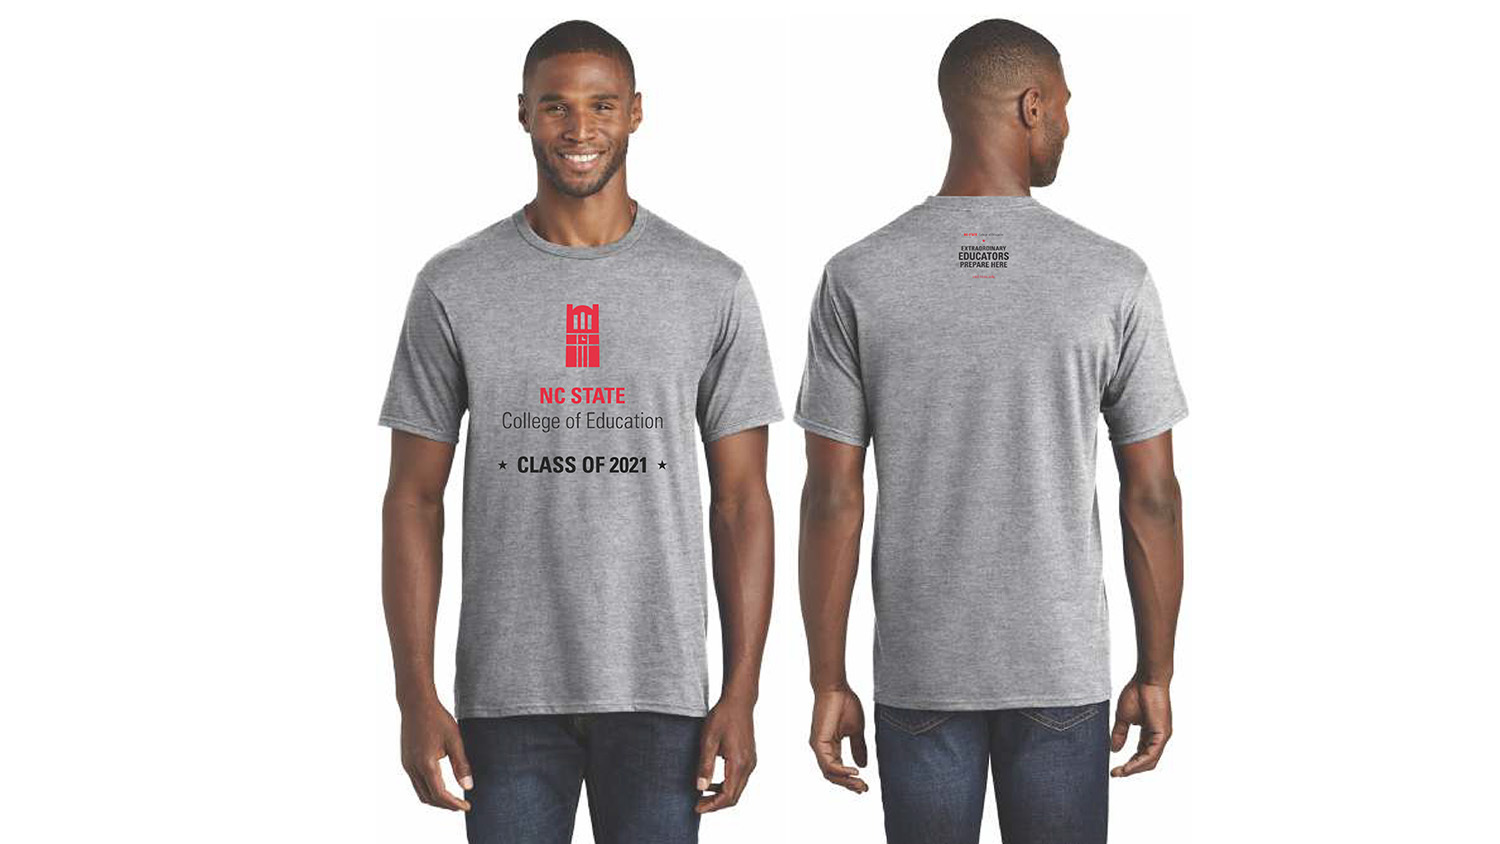 A t-shirt May 2021 graduates of the NC State College of Education received